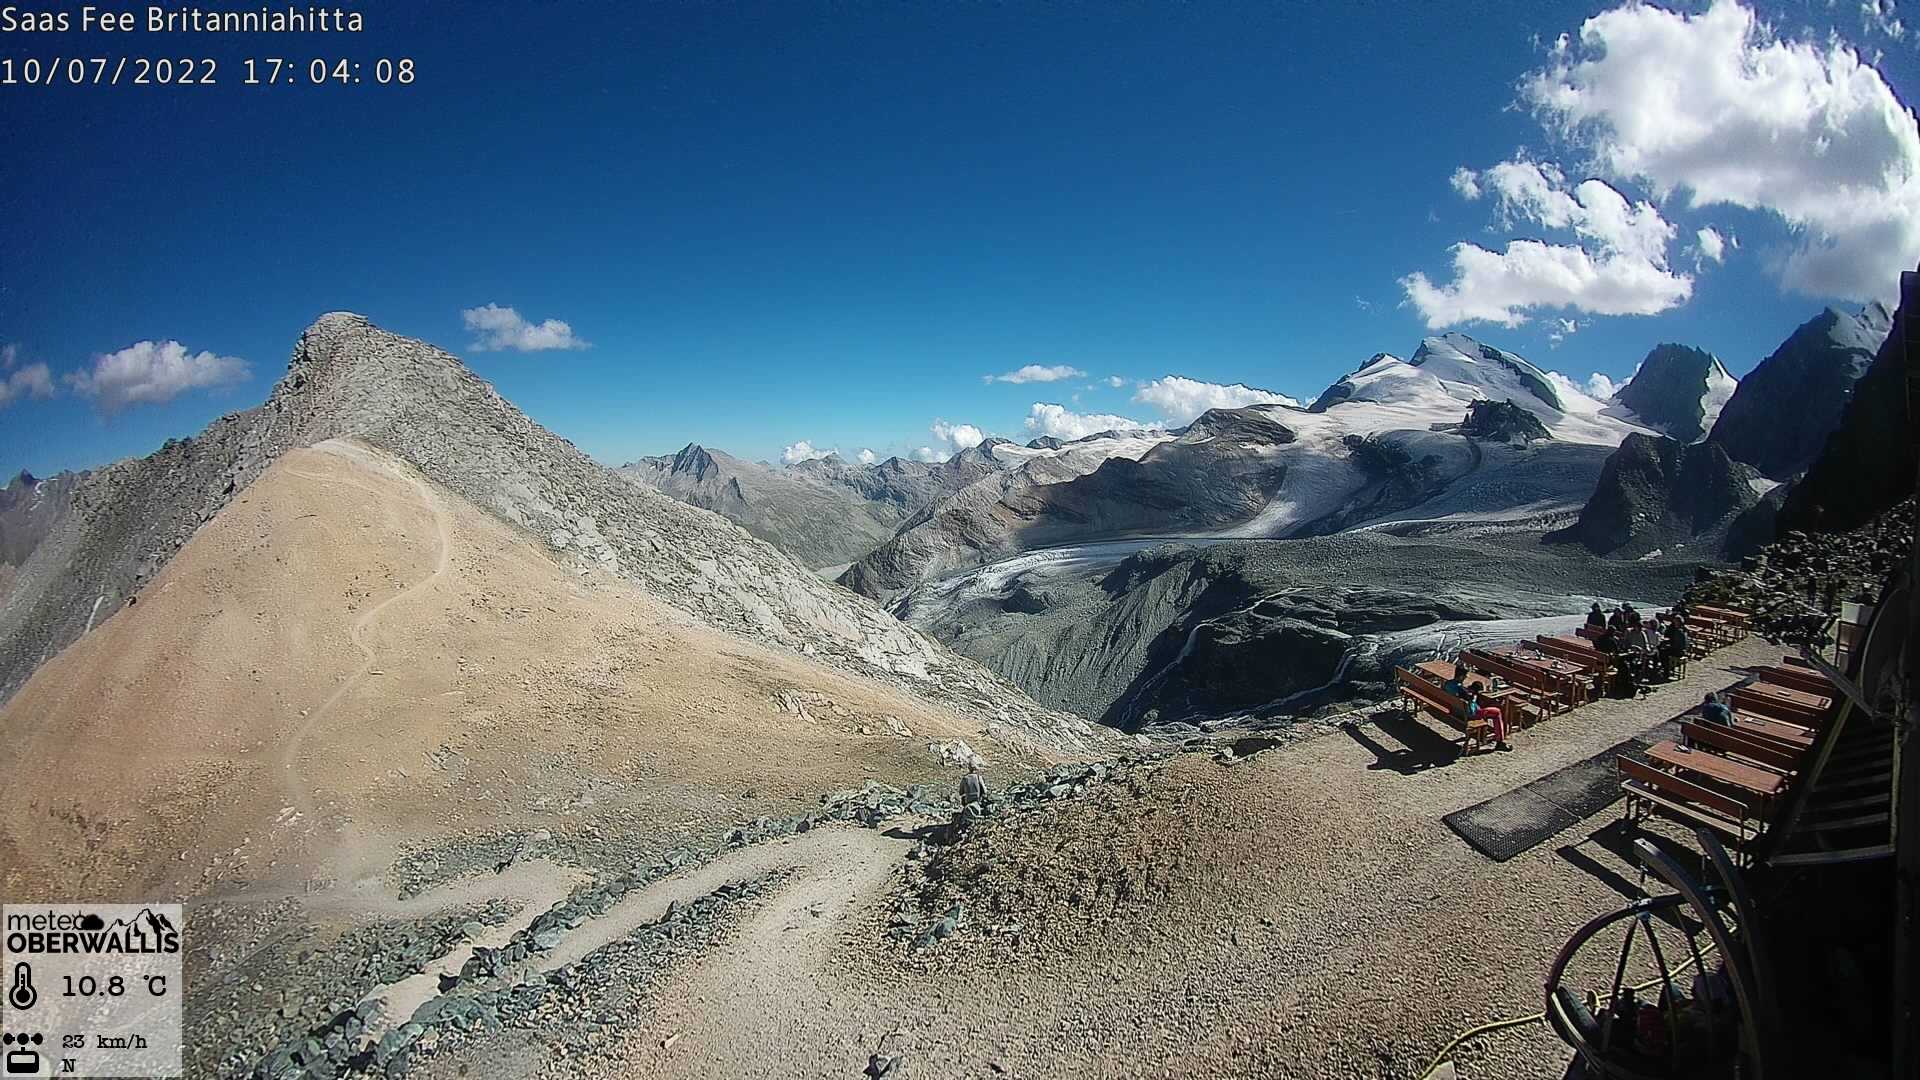 Webcam image from Britannia hut on July 10.